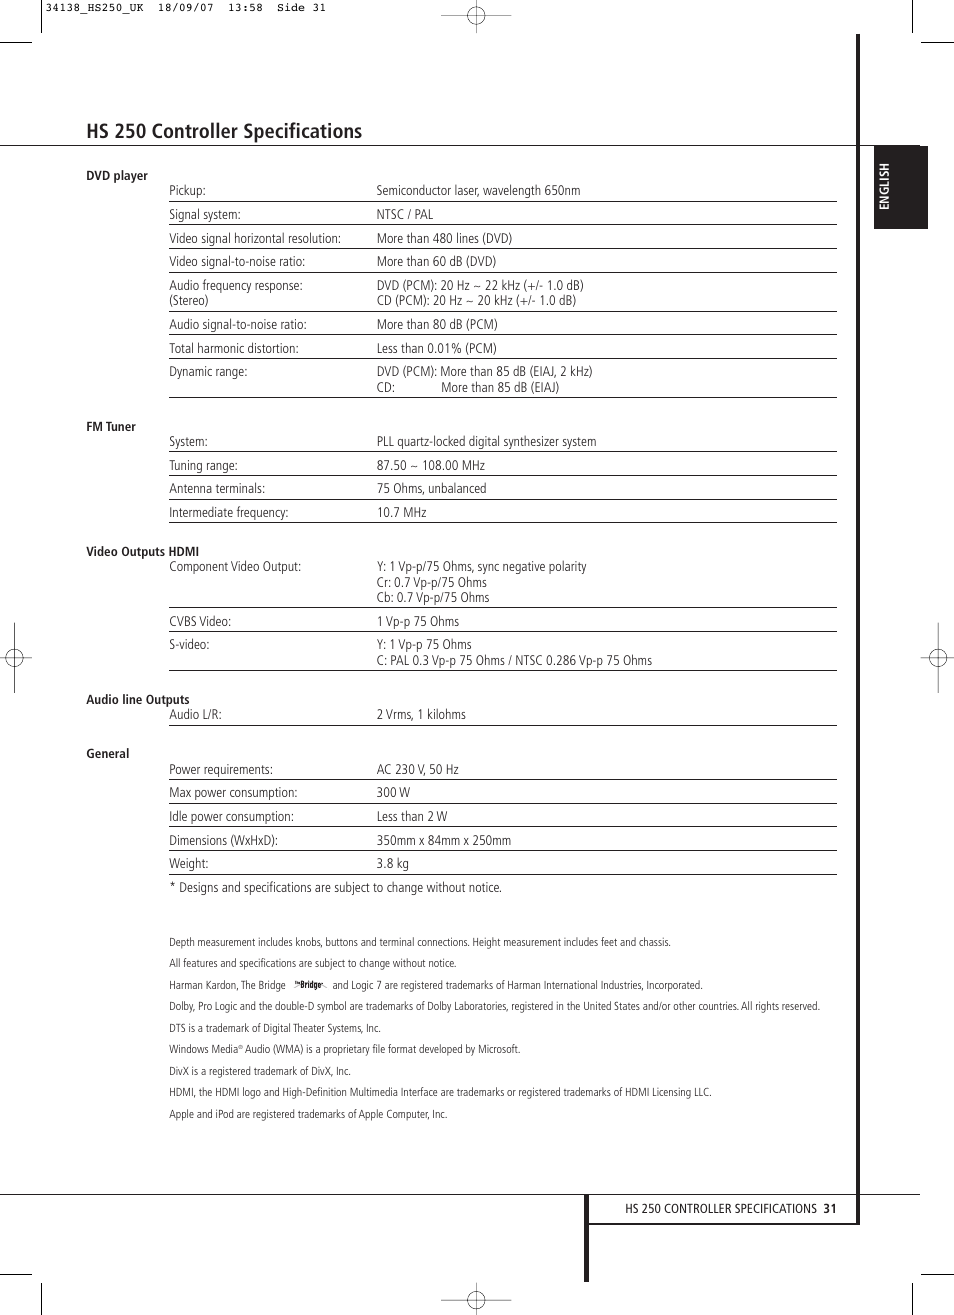 Hs 250 controller specifications | Harman-Kardon HS 250 User Manual | Page  31 / 32